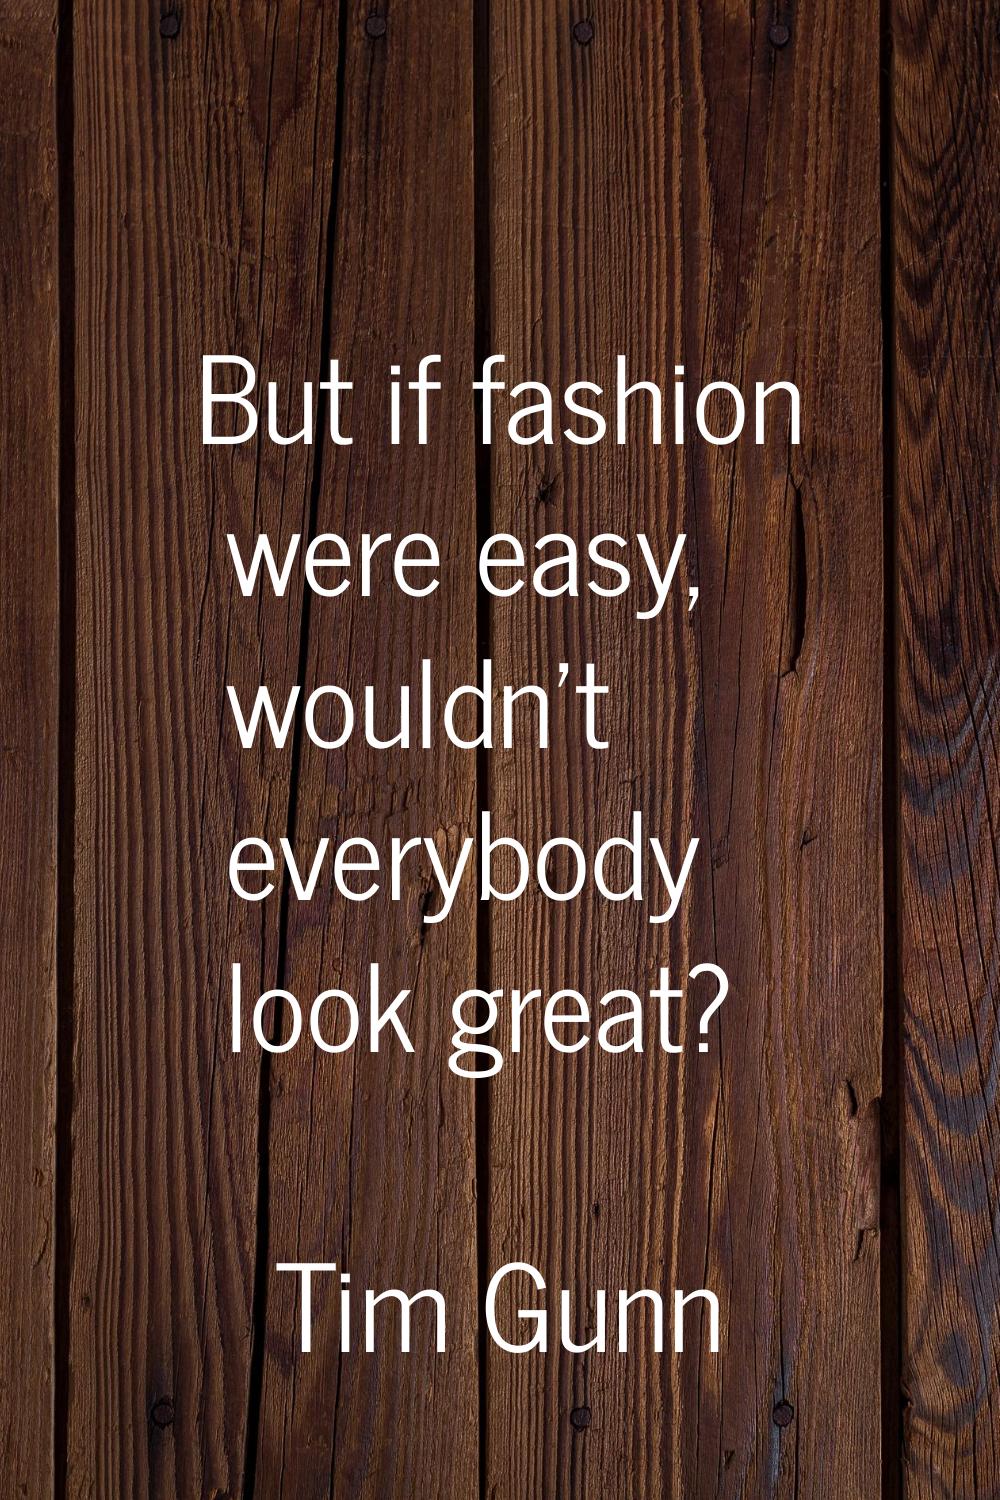 But if fashion were easy, wouldn't everybody look great?